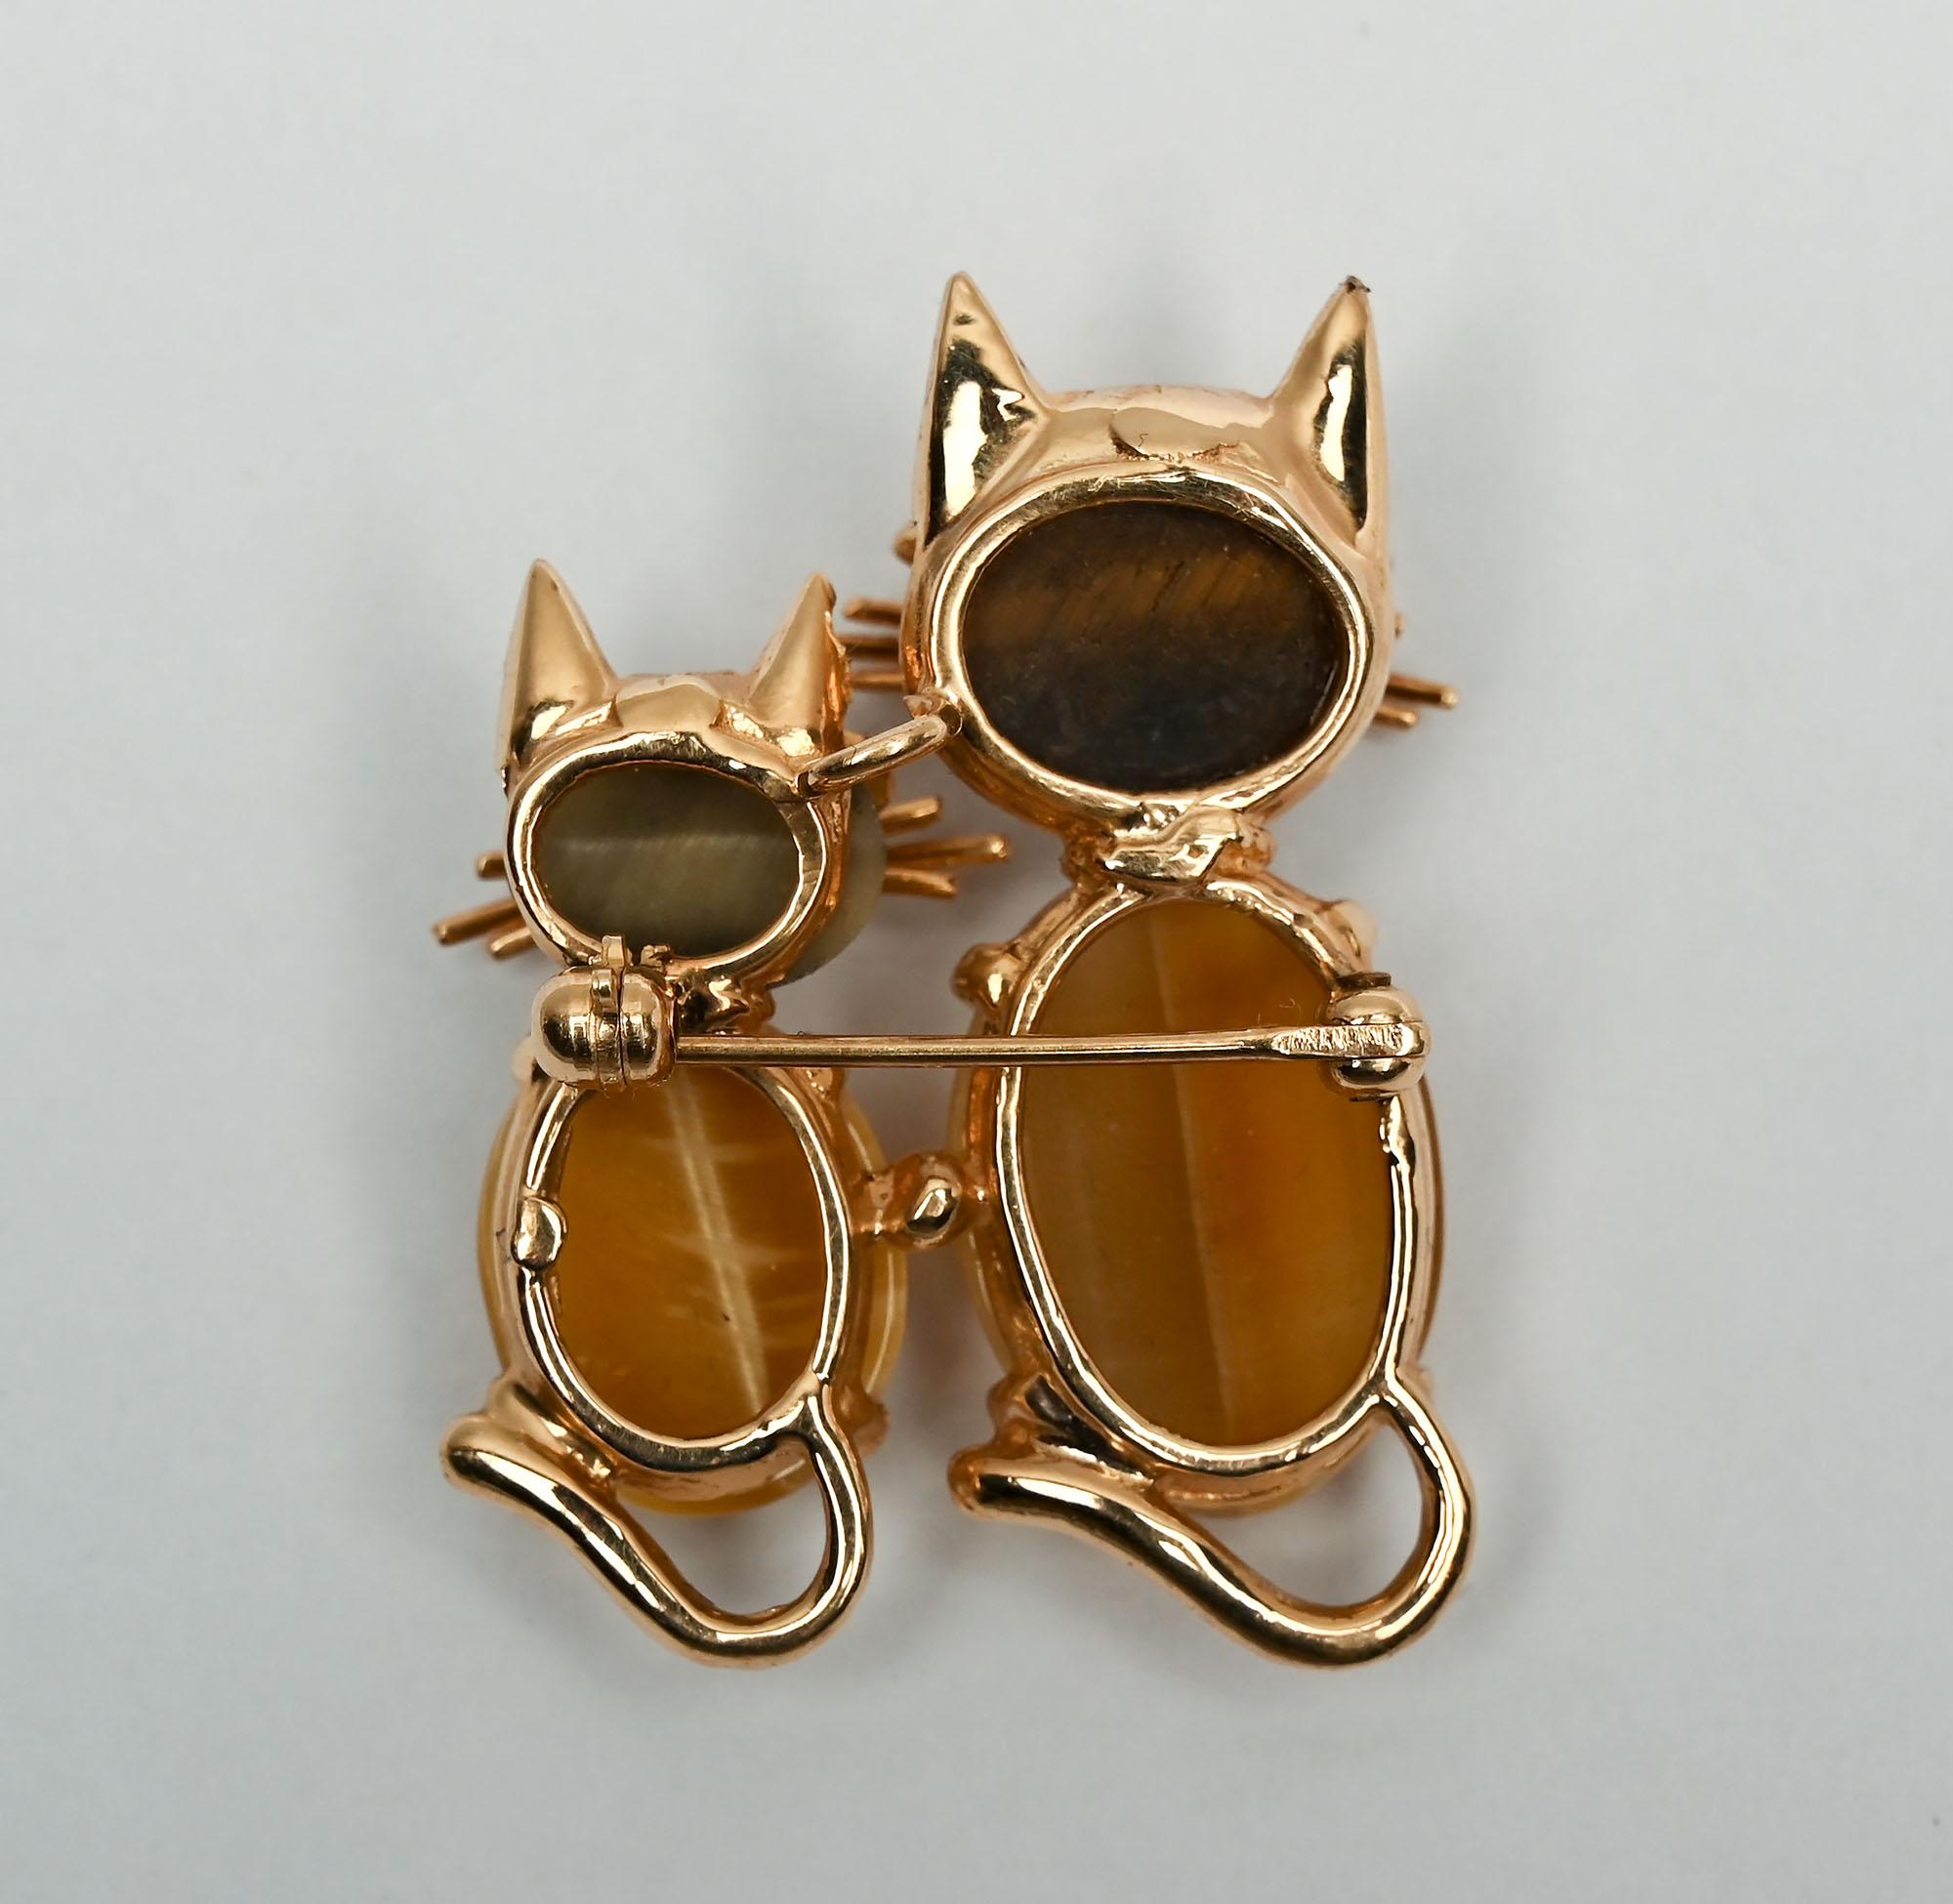 Cabochon Gold Kittens Brooch with Cat's Eye For Sale